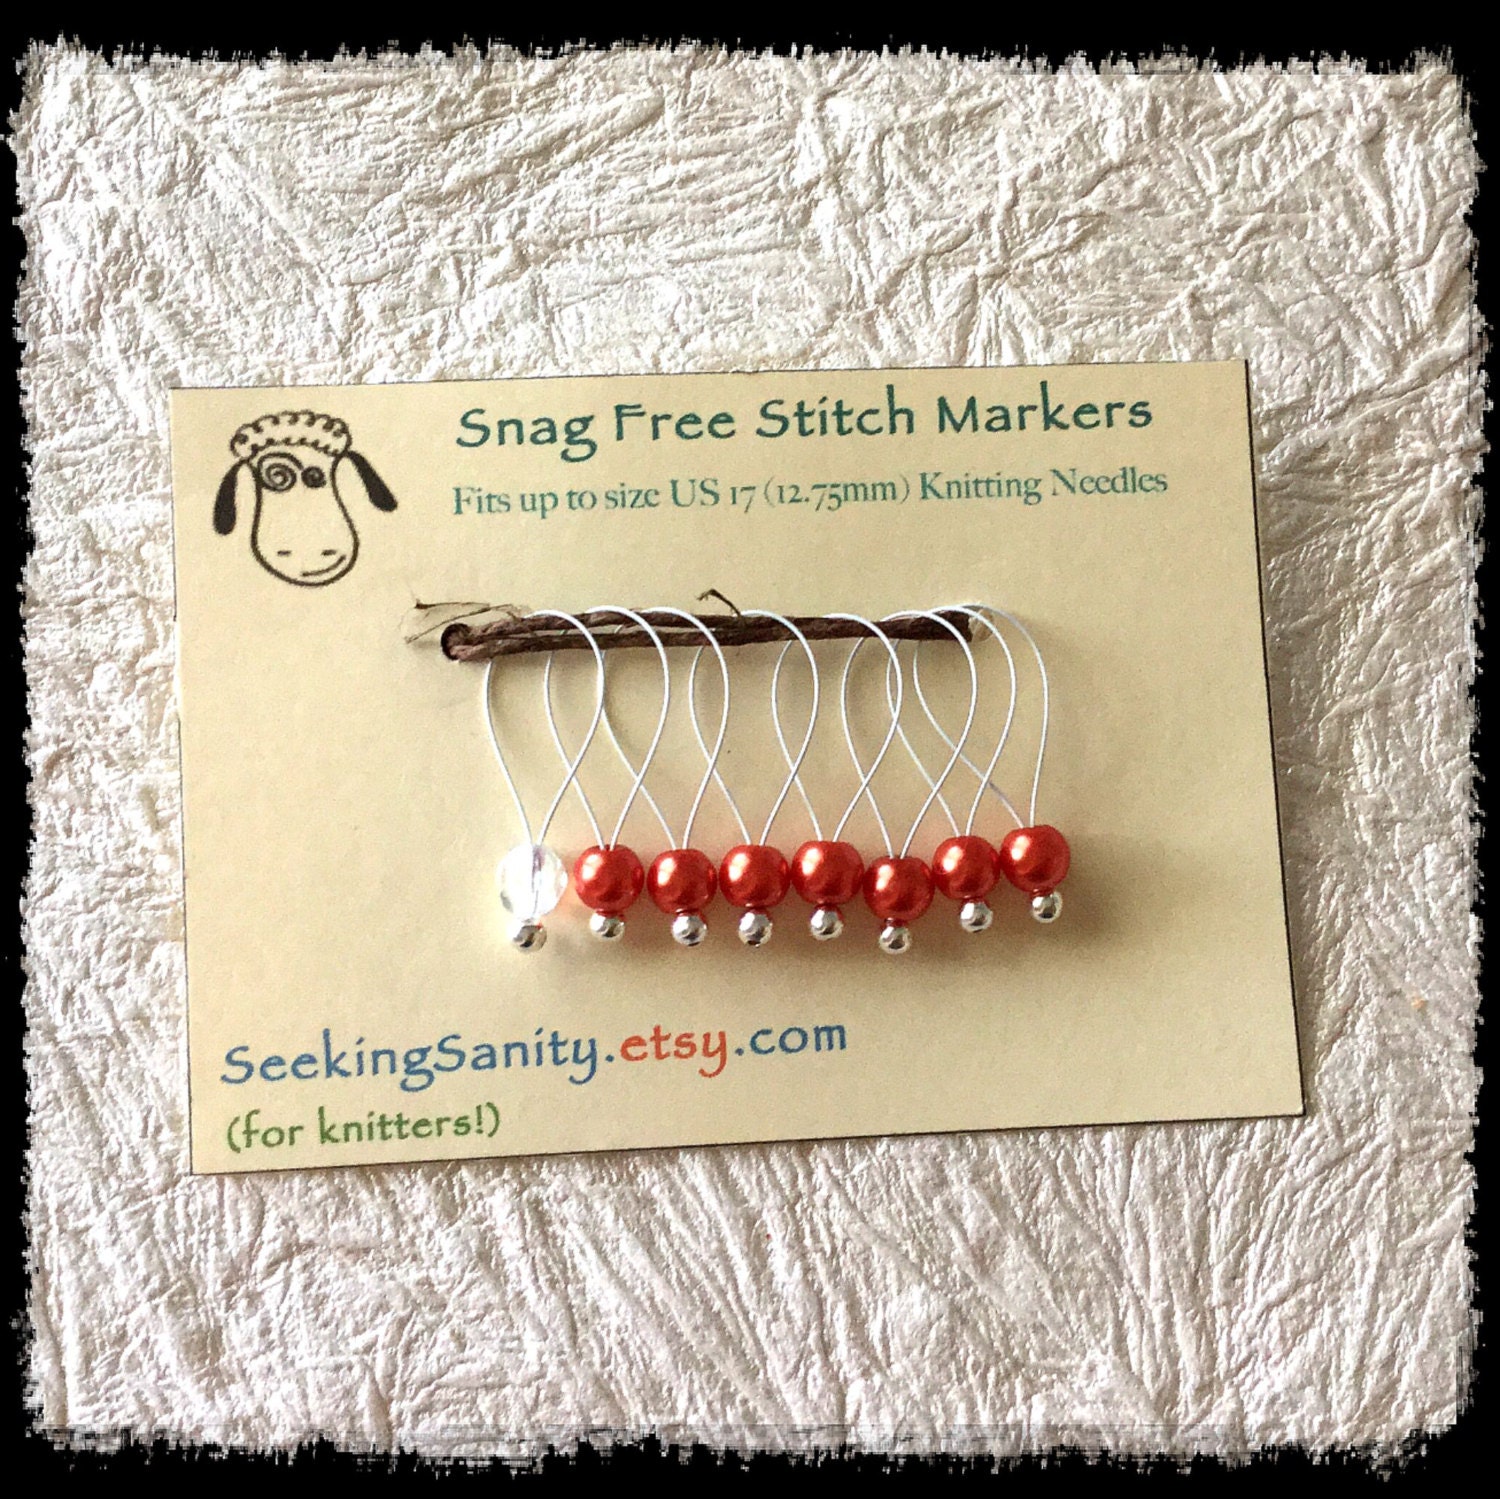 Knitting Needle 12.75 N43 Fits up to size US 17 White Glass Pearls Snag Free Stitch Markers Large Set of 8